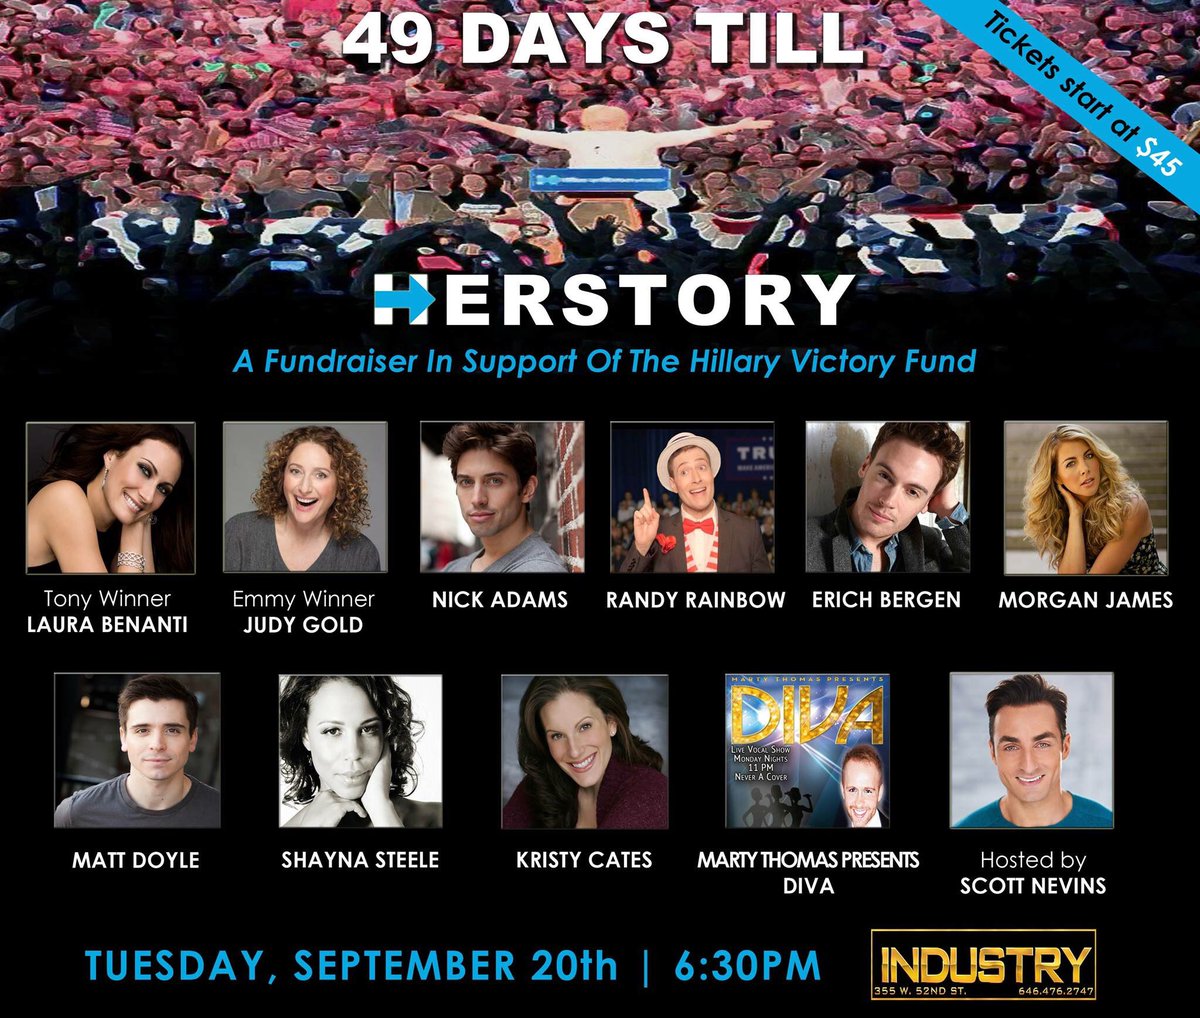 RT @ScottNevins: Say #ImWithHer and @TheDemocrats by attending ALL-STAR #49TillHerstory in NY! Just $45! https://t.co/30woWnXhd5 https://t.…